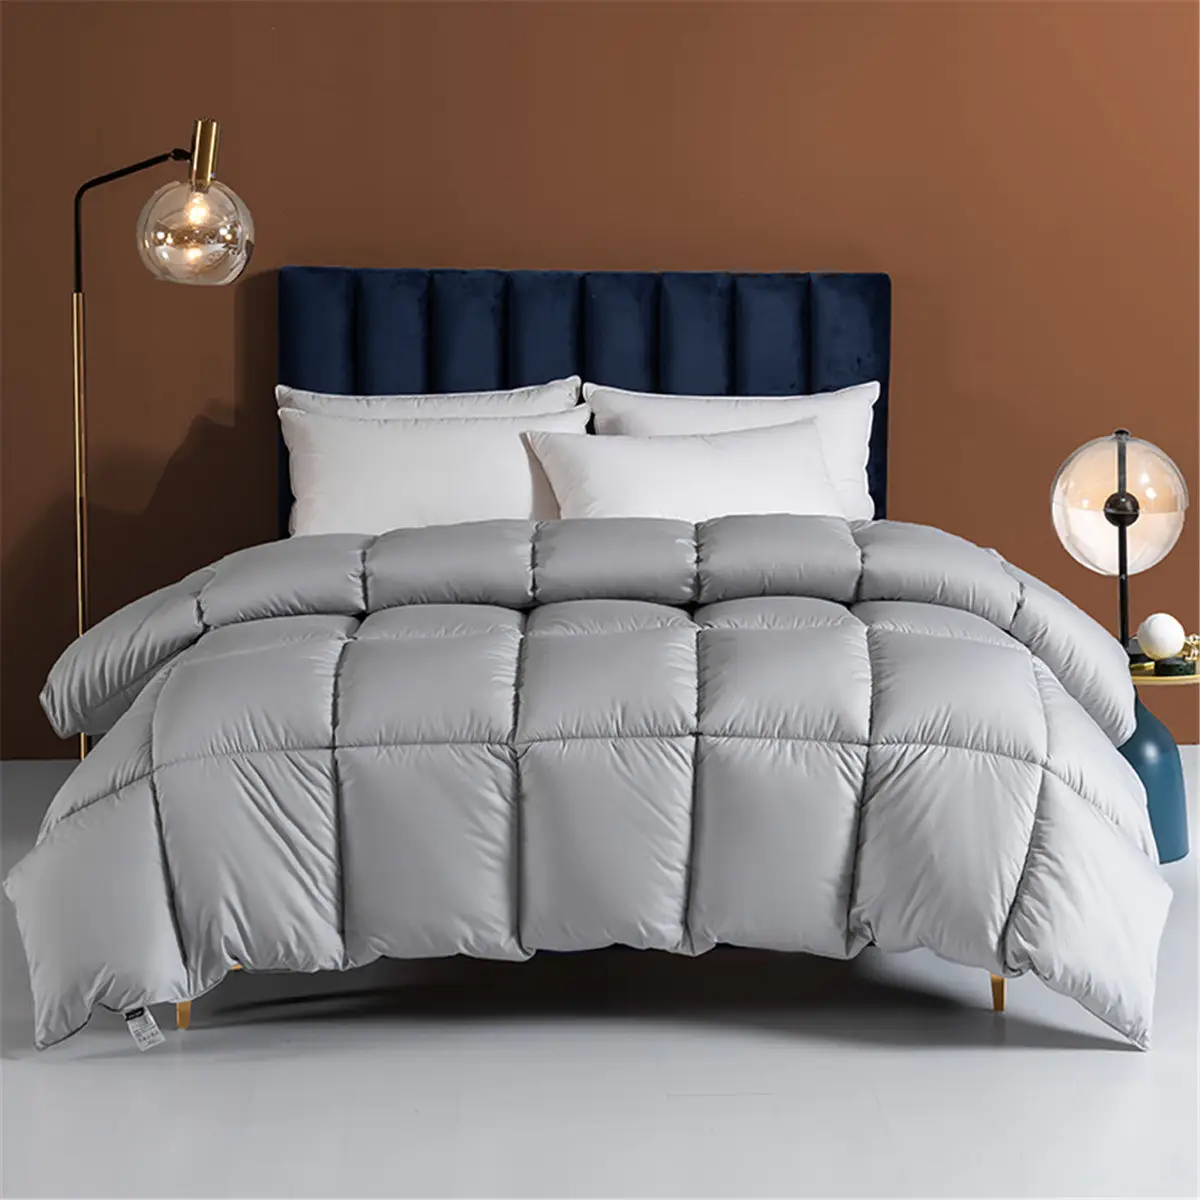 Luxury Soft Goose Down Bedding Gray Quilt Duck Feather Comforter Cotton Duvet For Home Hotel